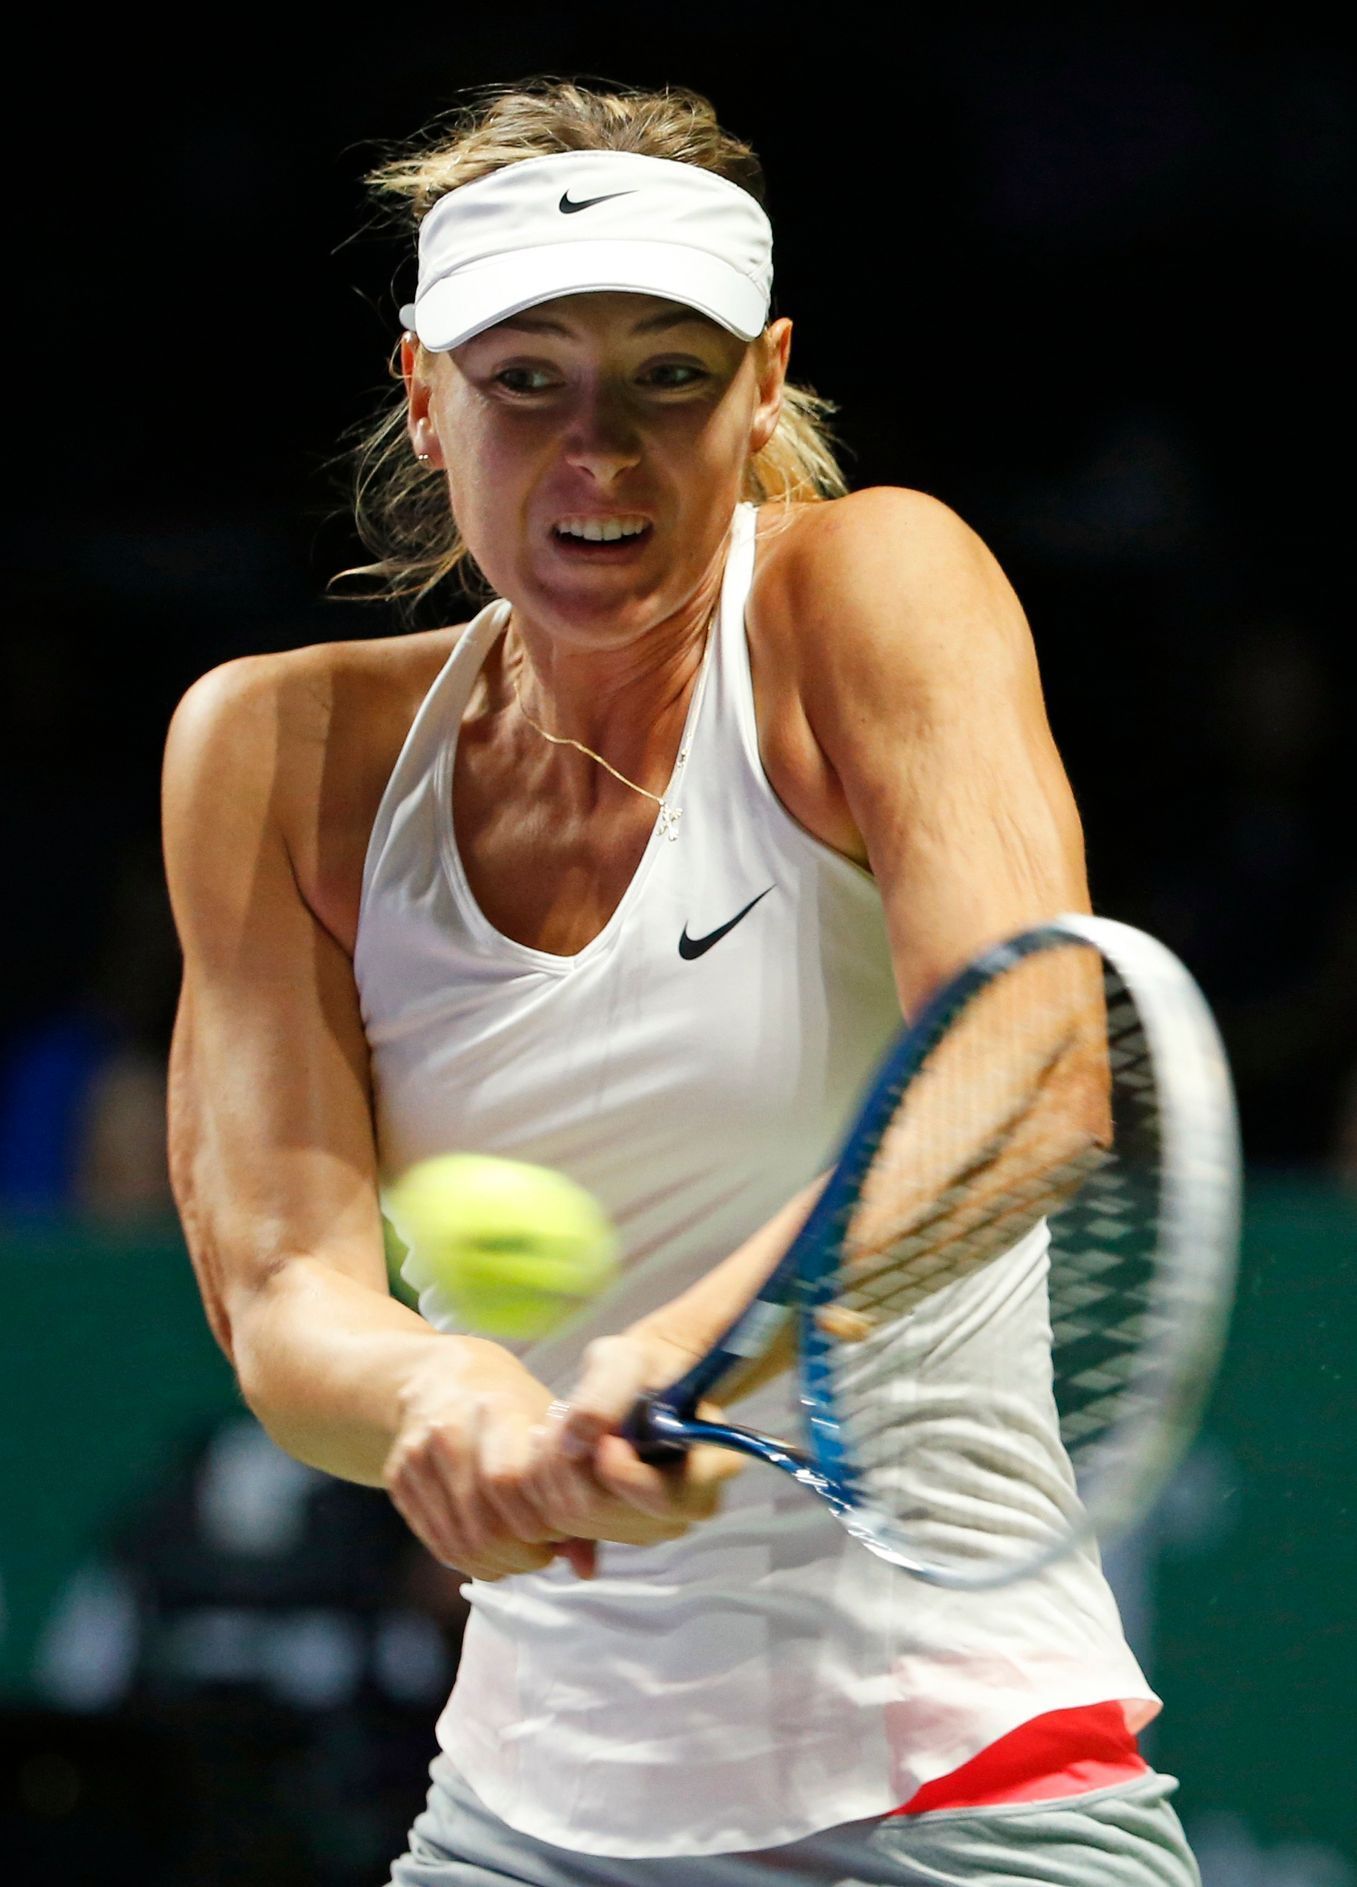 Maria Sharapova of Russia hits a return to Petra Kvitova of the Czech Republic during their WTA Finals singles tennis match at the Singapore Indoor Stadium